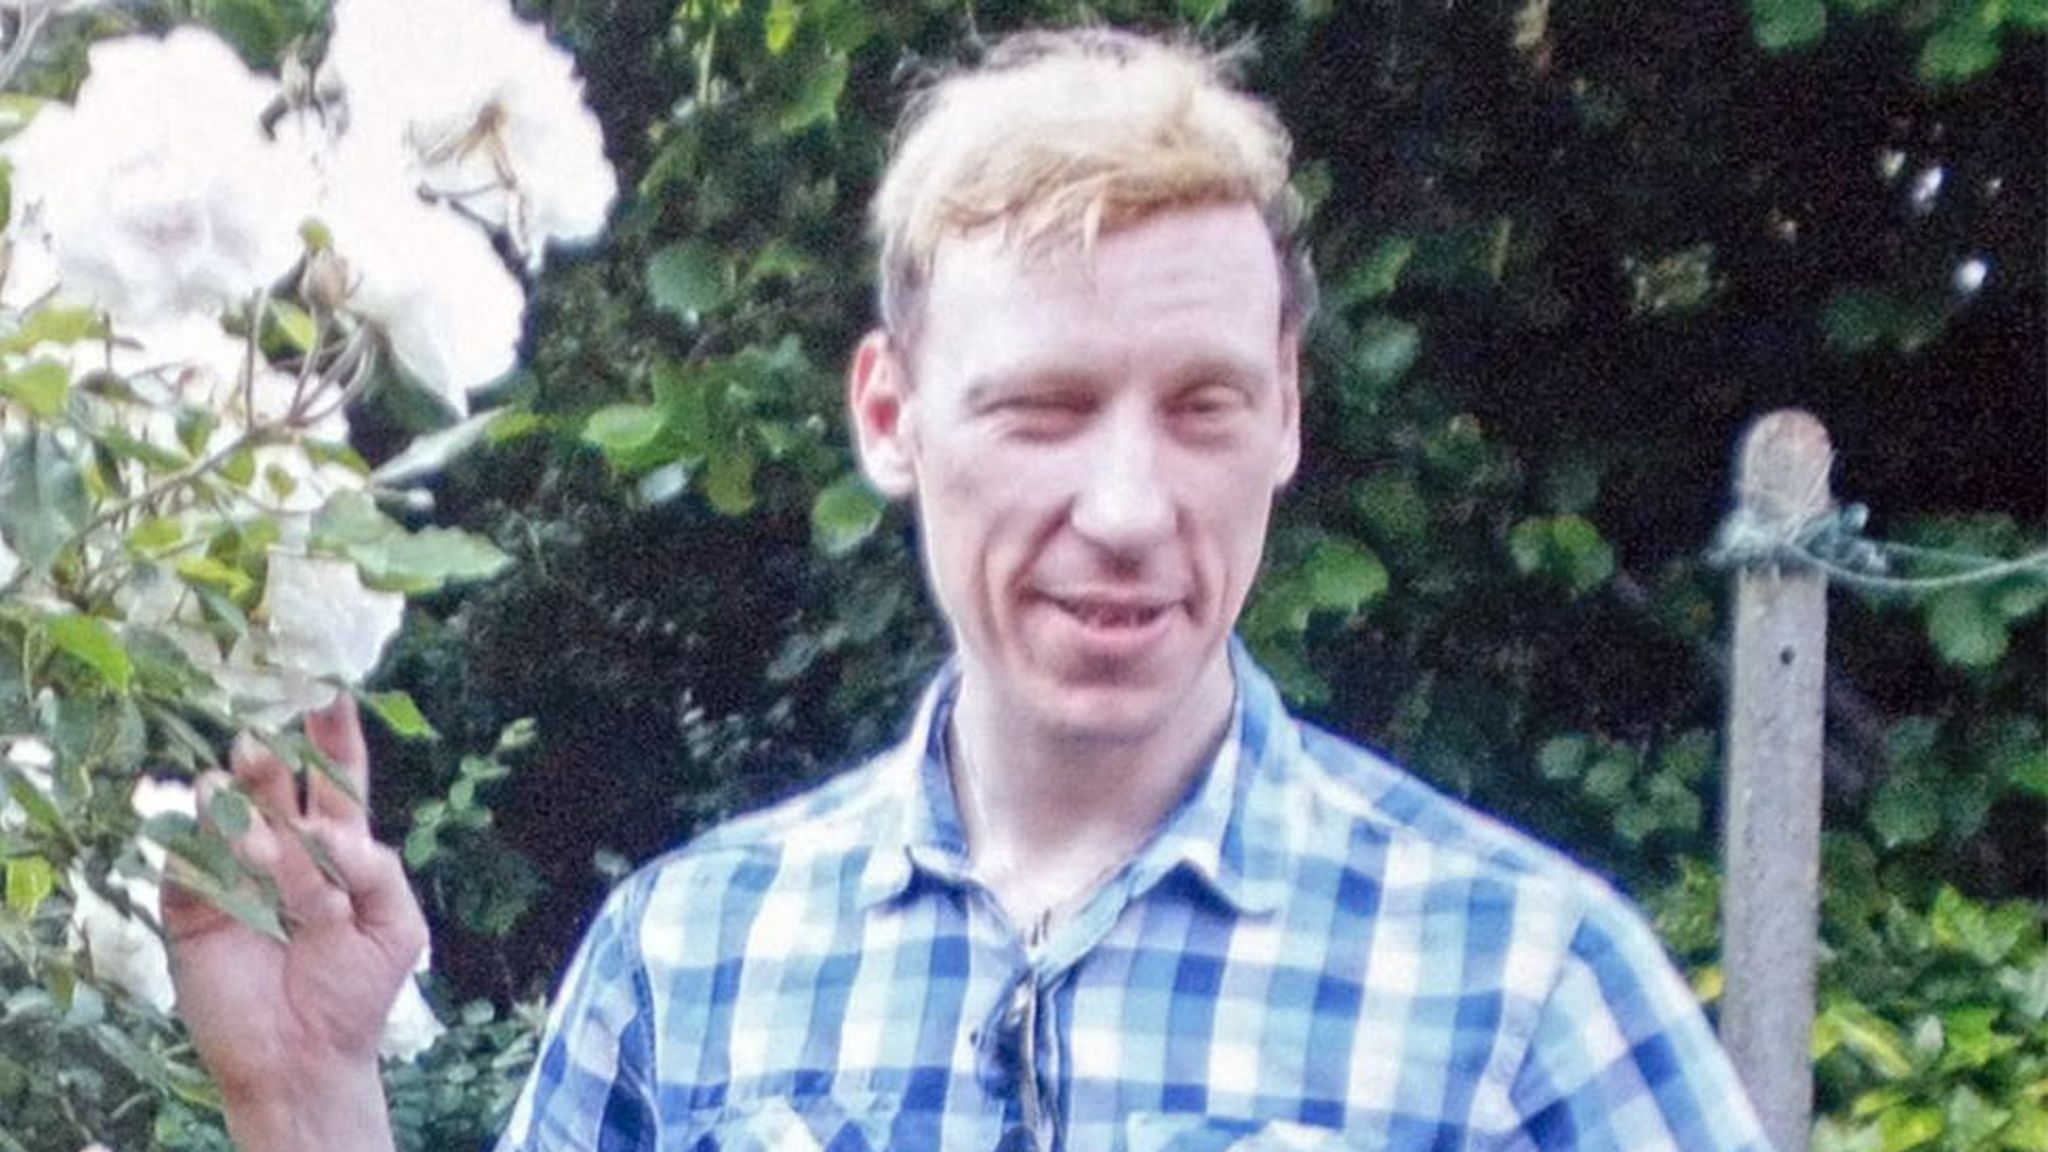 Stephen Port Murders Mps Call For Inquiry Into Claims Of Institutional Homophobia At Met